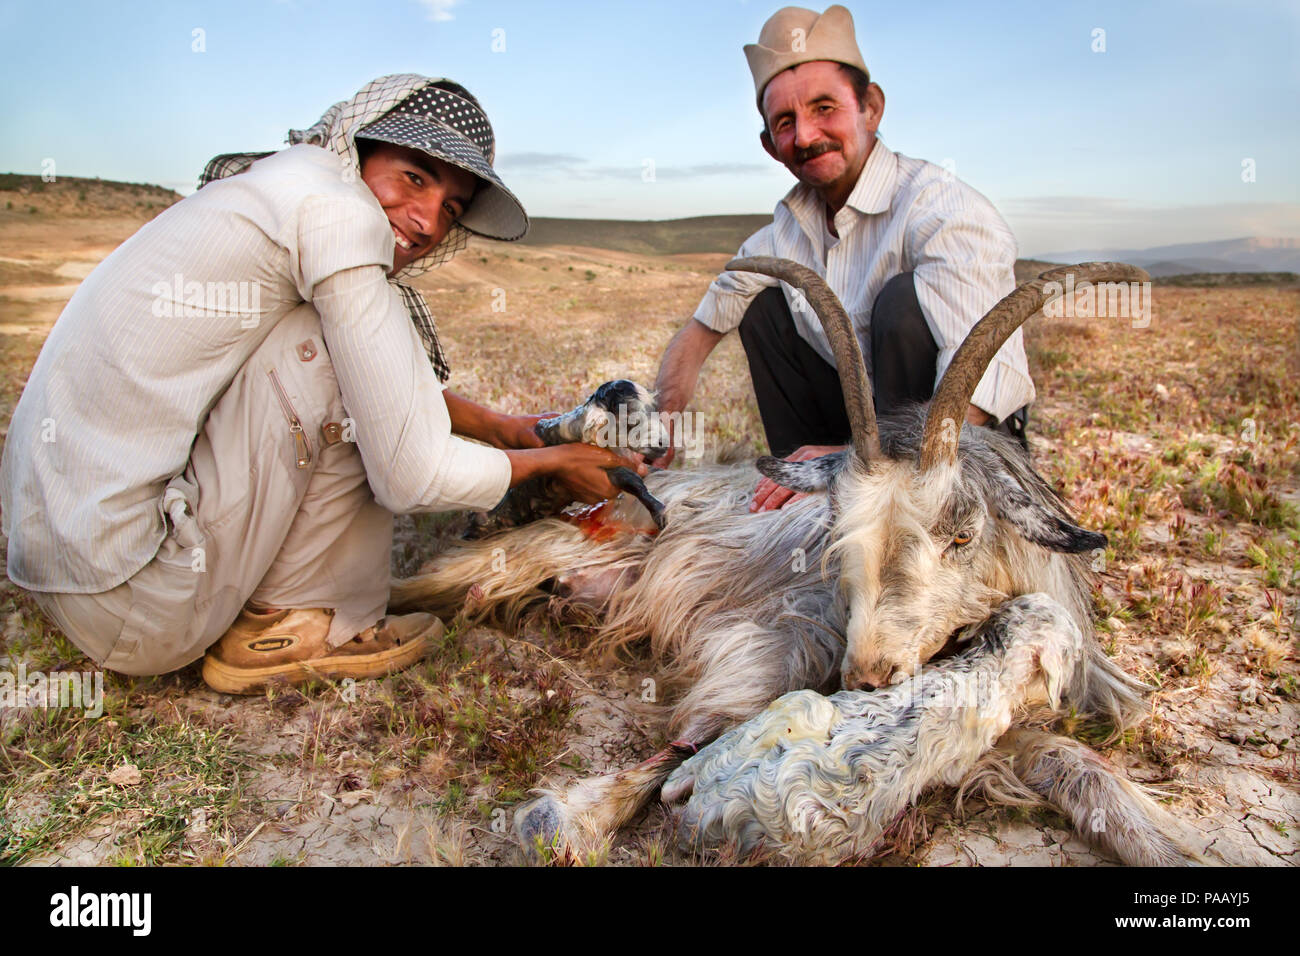 A goat giving birth in a community of Qashqai nomad people, Iran Stock Photo